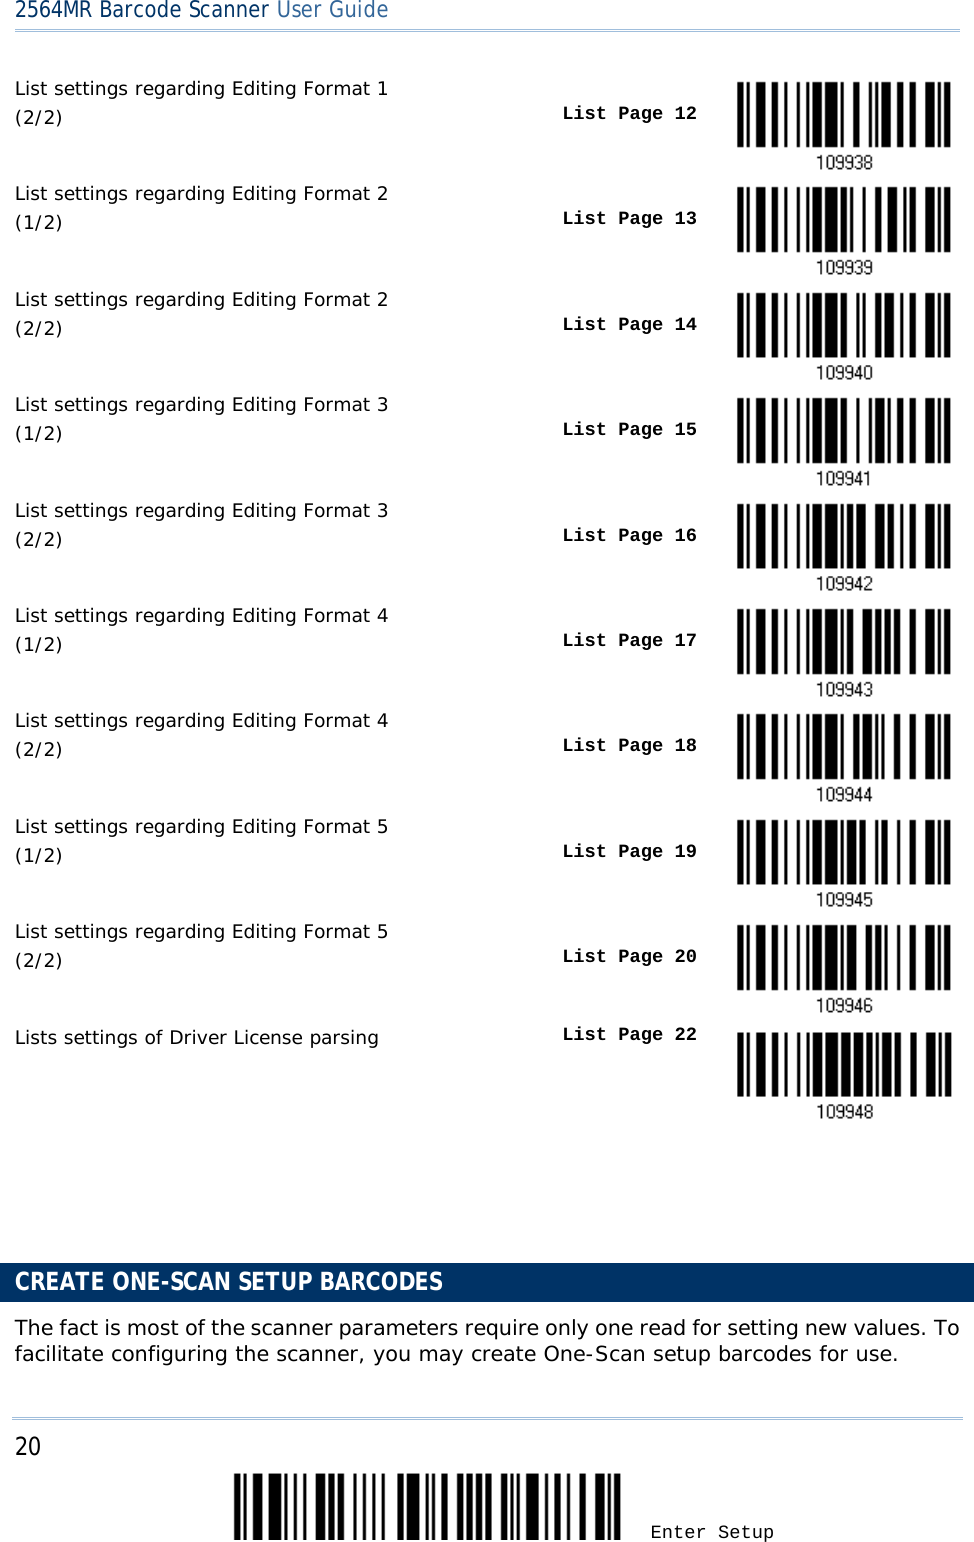 2564MR Barcode Scanner User Guide  List settings regarding Editing Format 1  (2/2)  List Page 12  List settings regarding Editing Format 2  (1/2)  List Page 13  List settings regarding Editing Format 2  (2/2)  List Page 14  List settings regarding Editing Format 3 (1/2)  List Page 15  List settings regarding Editing Format 3 (2/2)  List Page 16  List settings regarding Editing Format 4  (1/2)  List Page 17  List settings regarding Editing Format 4  (2/2)  List Page 18  List settings regarding Editing Format 5 (1/2)  List Page 19  List settings regarding Editing Format 5 (2/2)  List Page 20  Lists settings of Driver License parsing List Page 22     CREATE ONE-SCAN SETUP BARCODES The fact is most of the scanner parameters require only one read for setting new values. To facilitate configuring the scanner, you may create One-Scan setup barcodes for use. 20 Enter Setup 